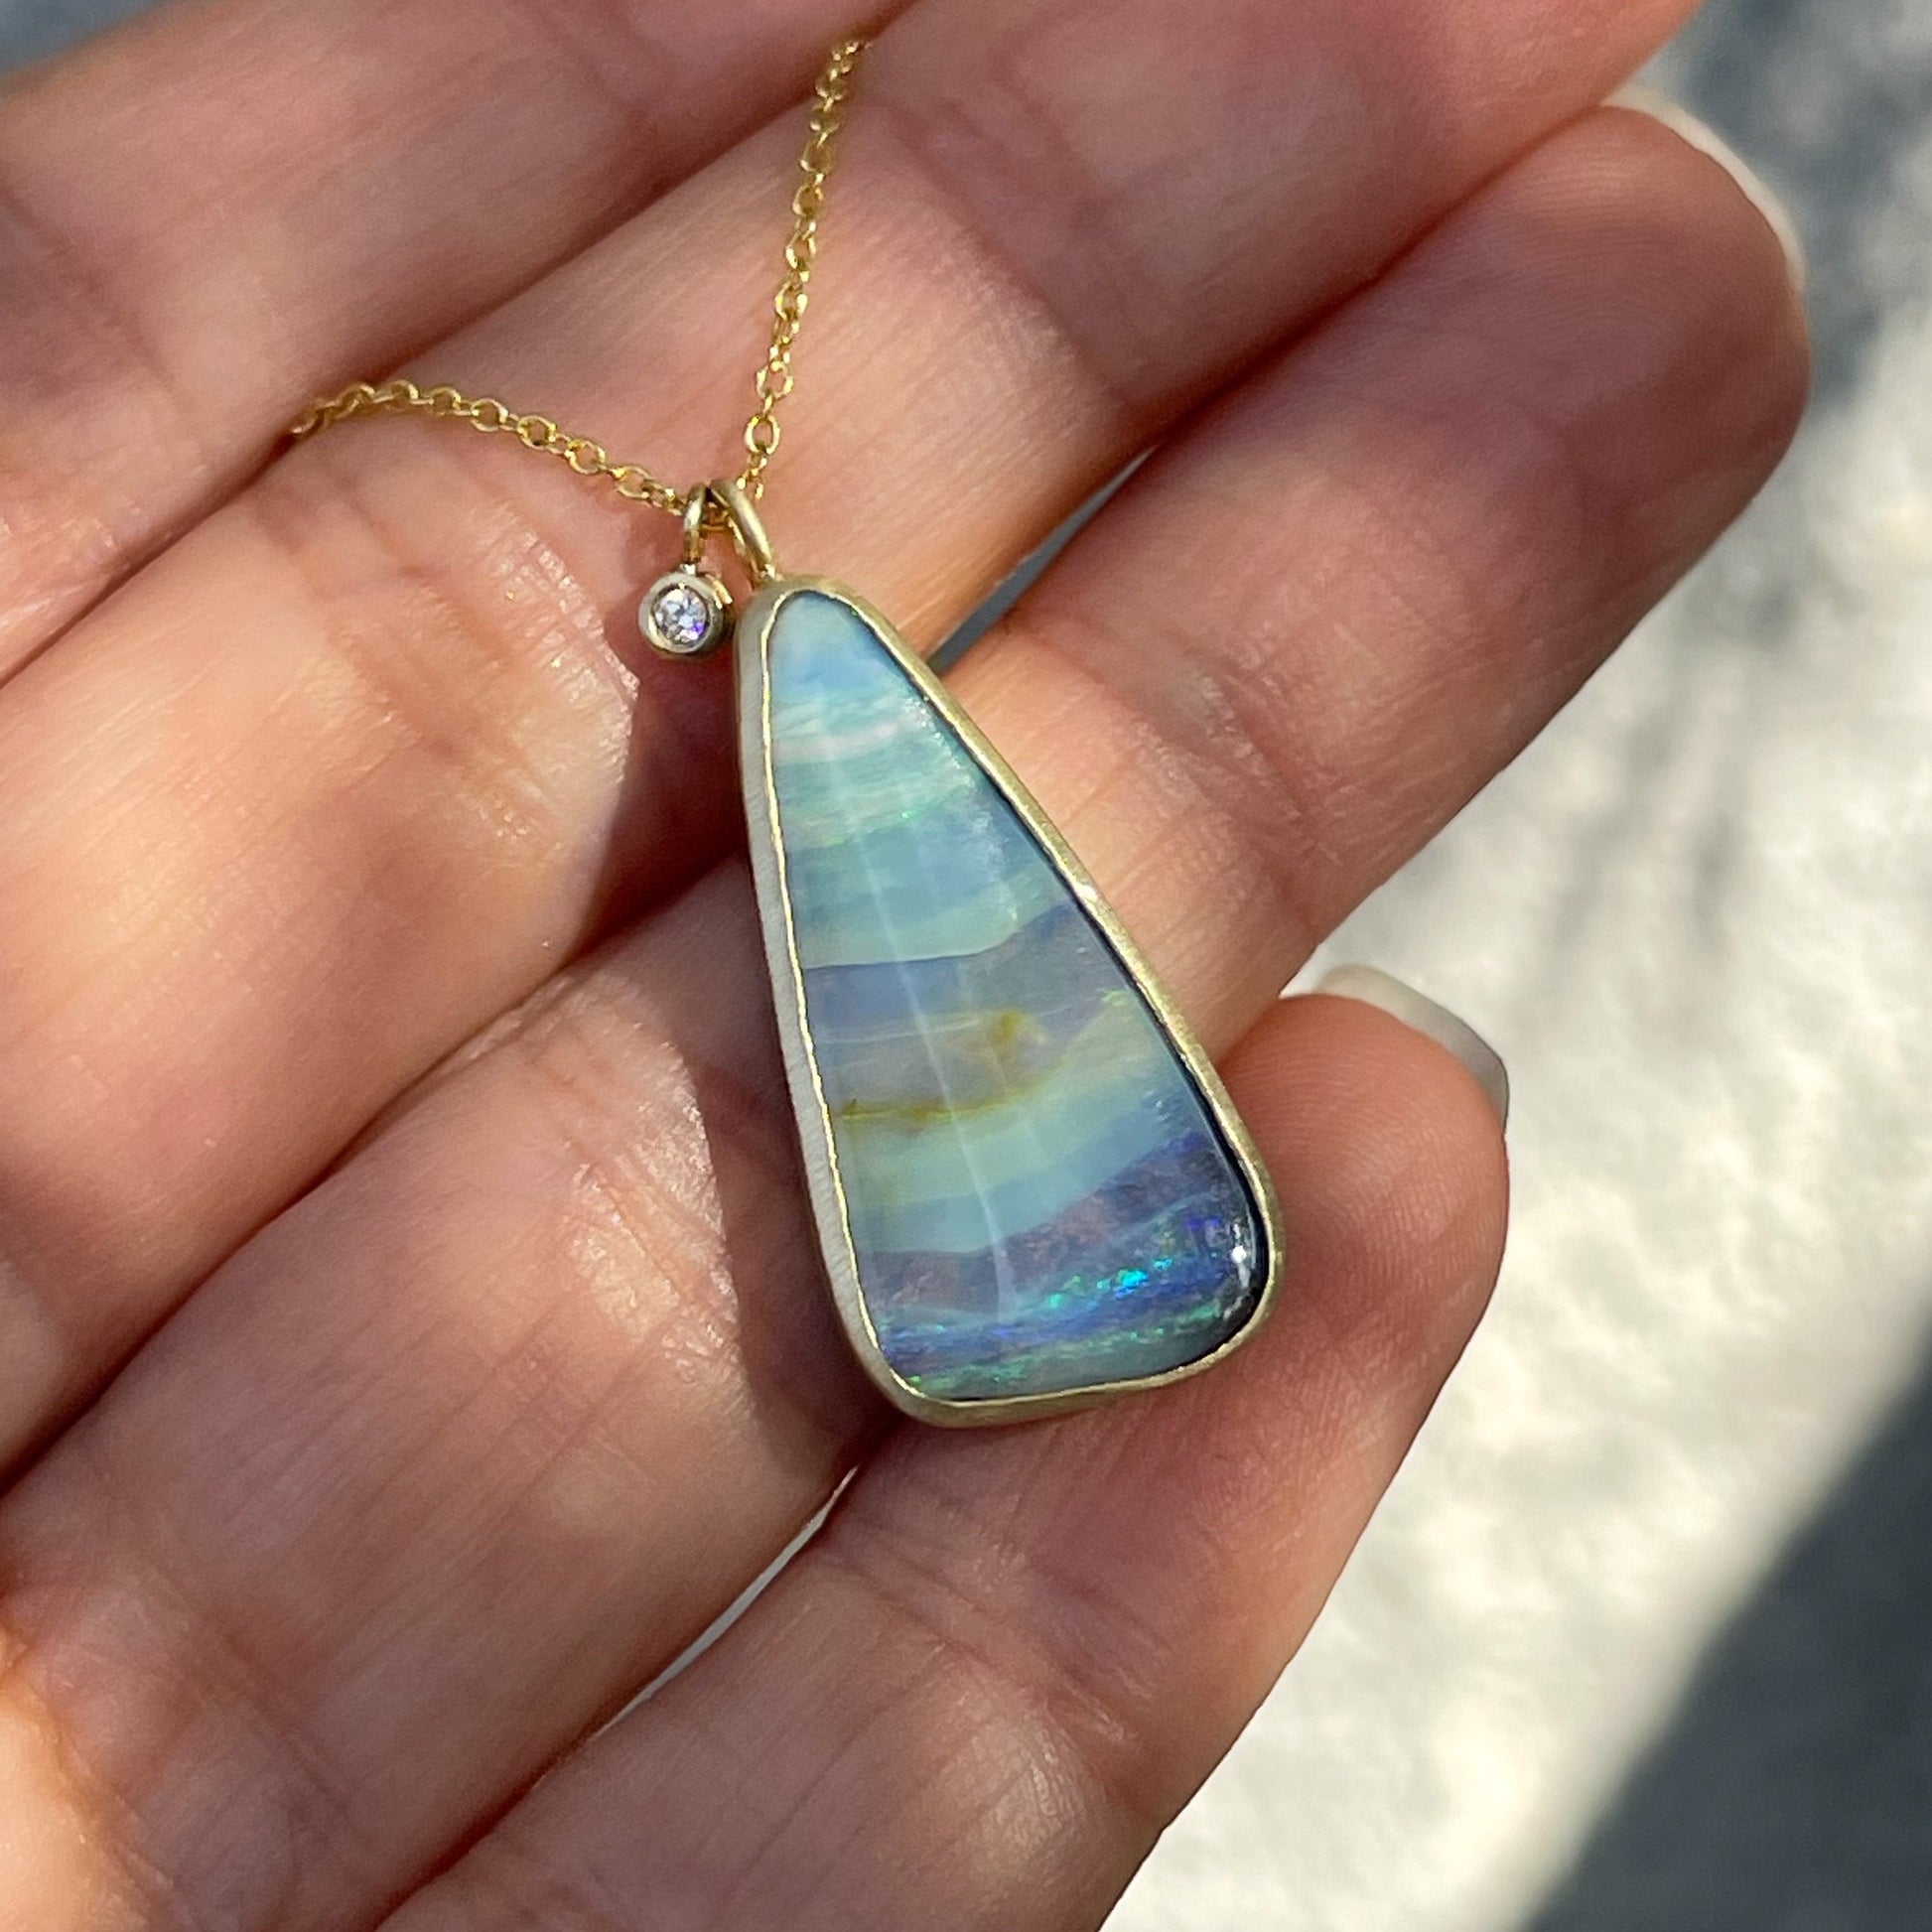 Opal and diamond necklace by NIXIN Jewelry shown against hand